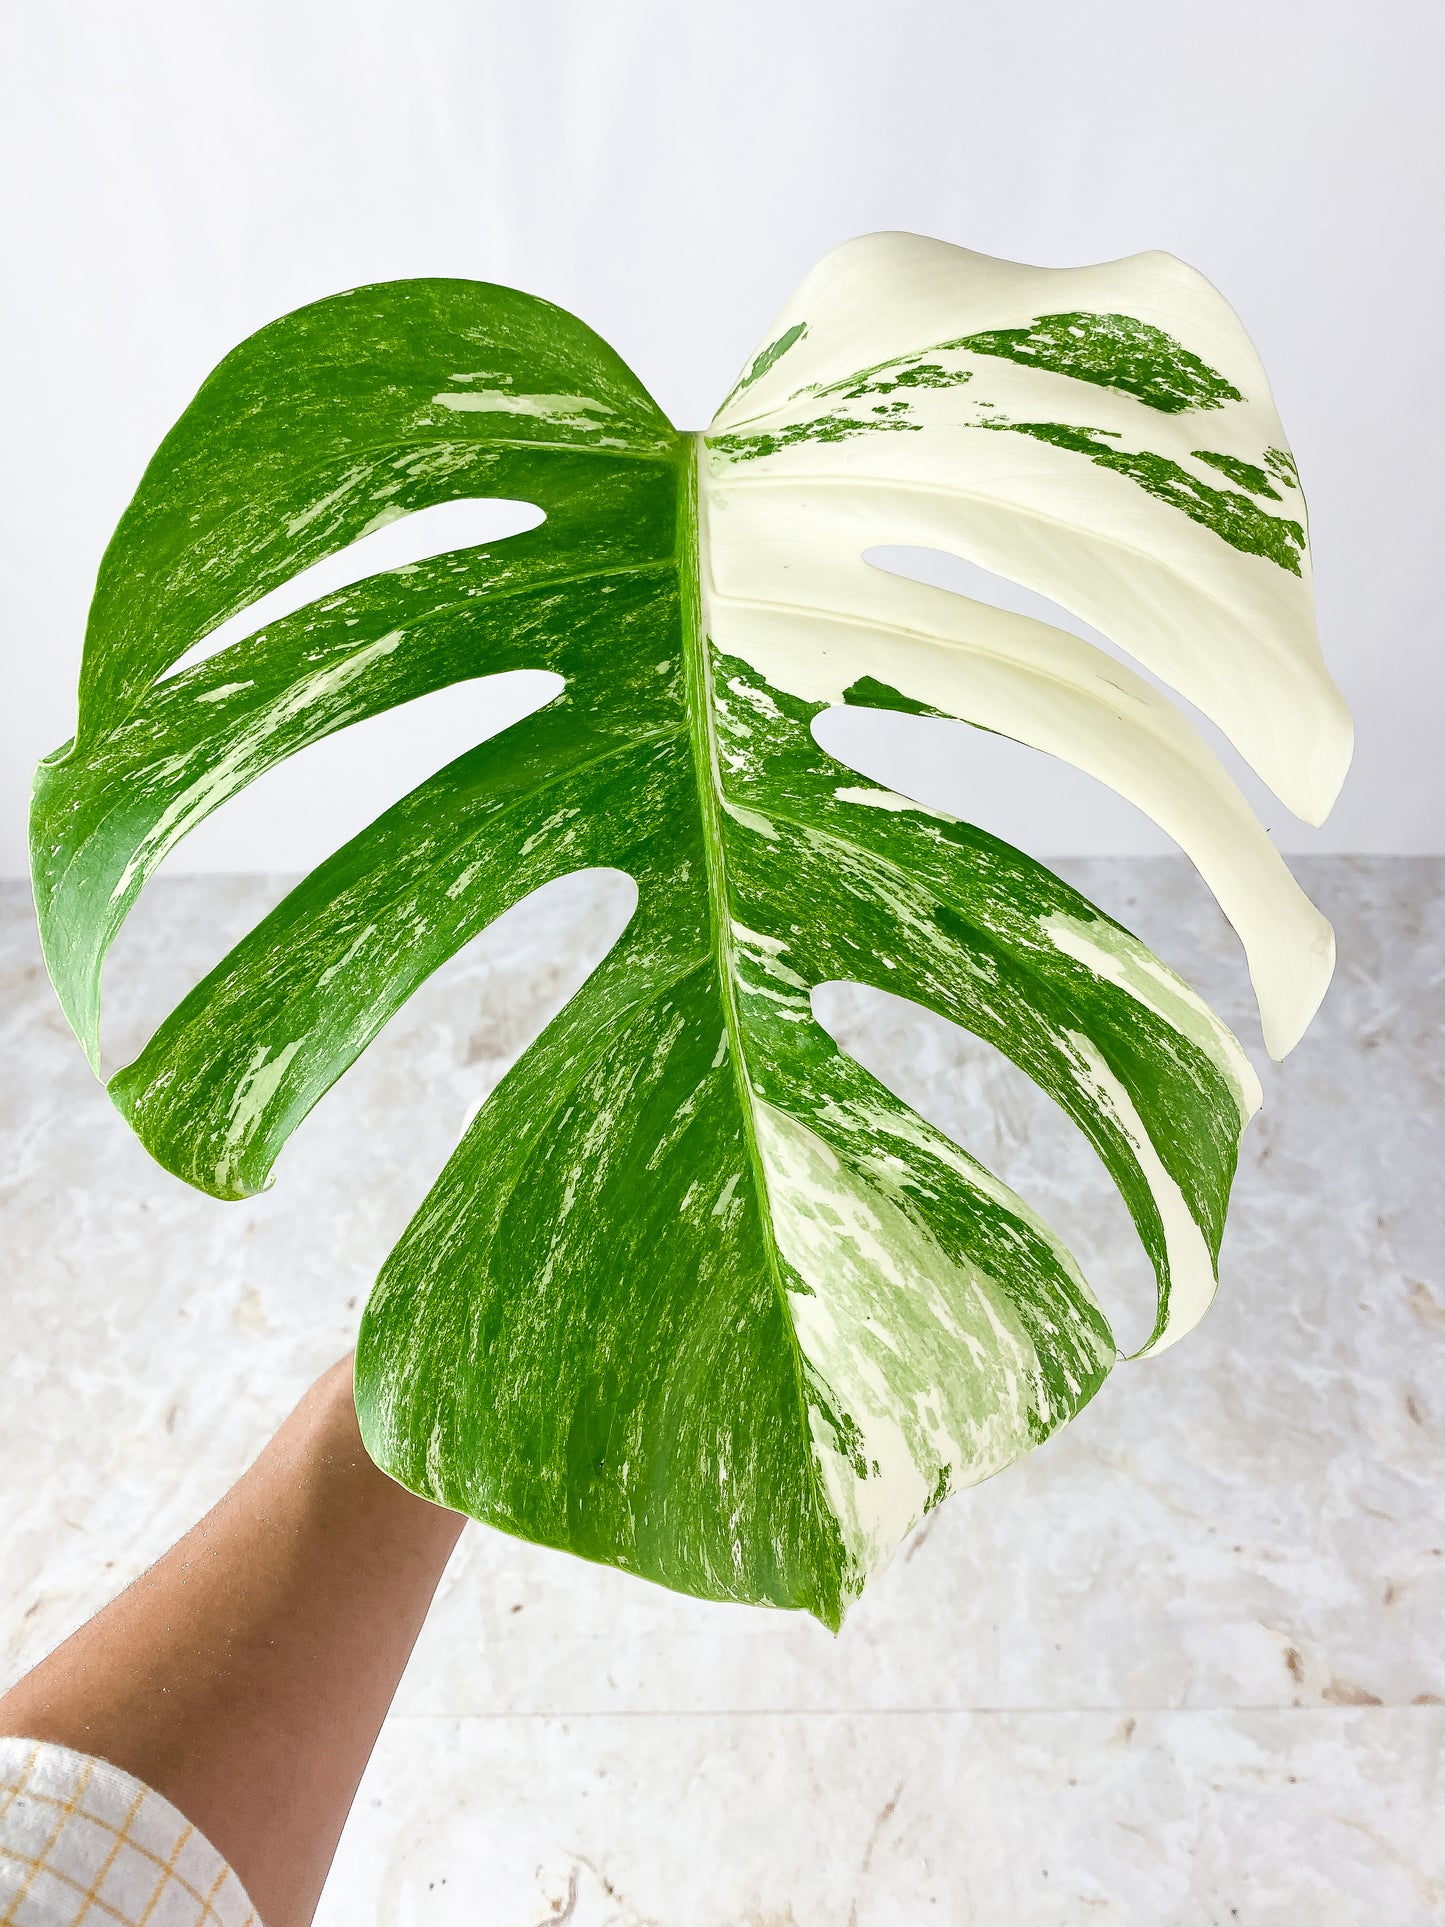 Monstera Albo Rooting 1 highly variegated leaf. top cutting